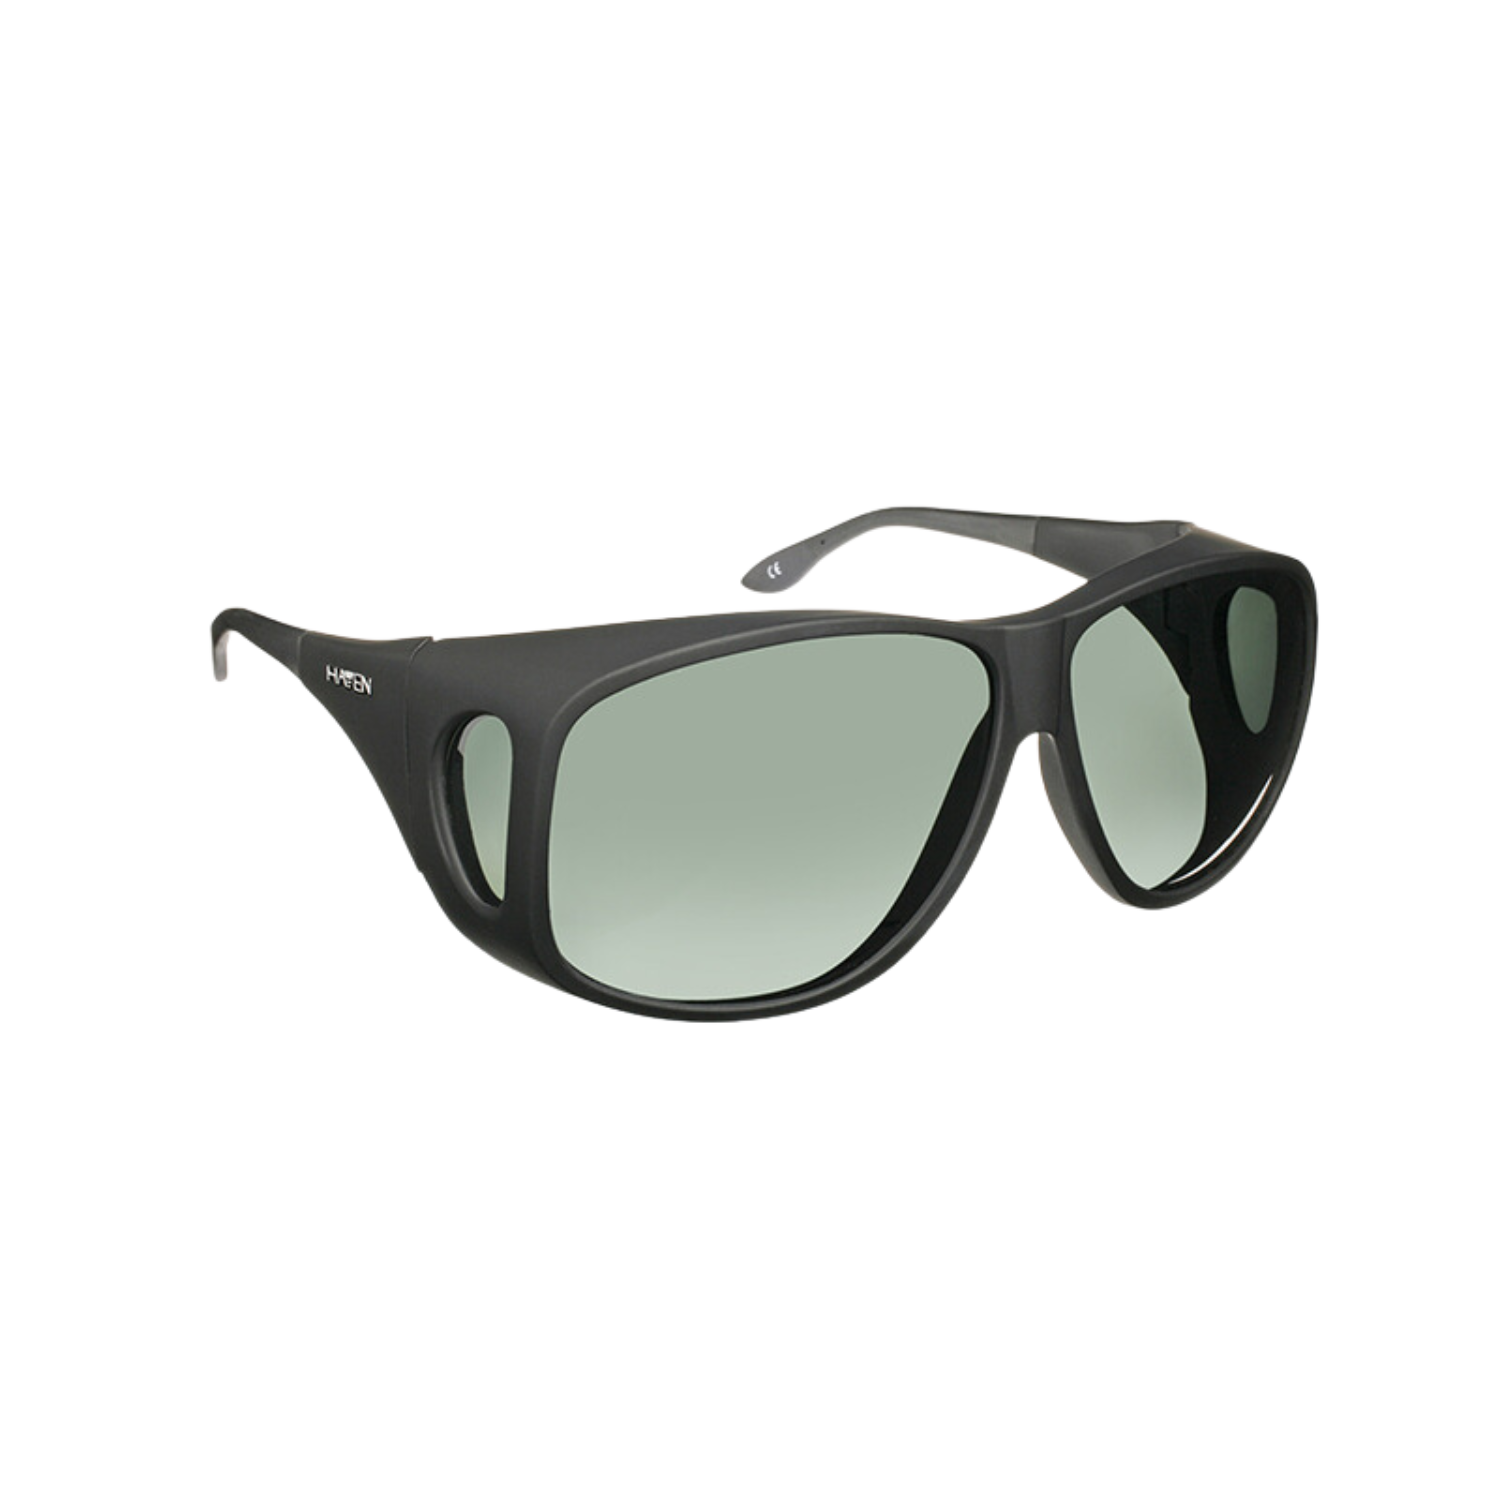 Image of the Eschenbach Haven Banyan XL polarized sunglasses with gray tint.